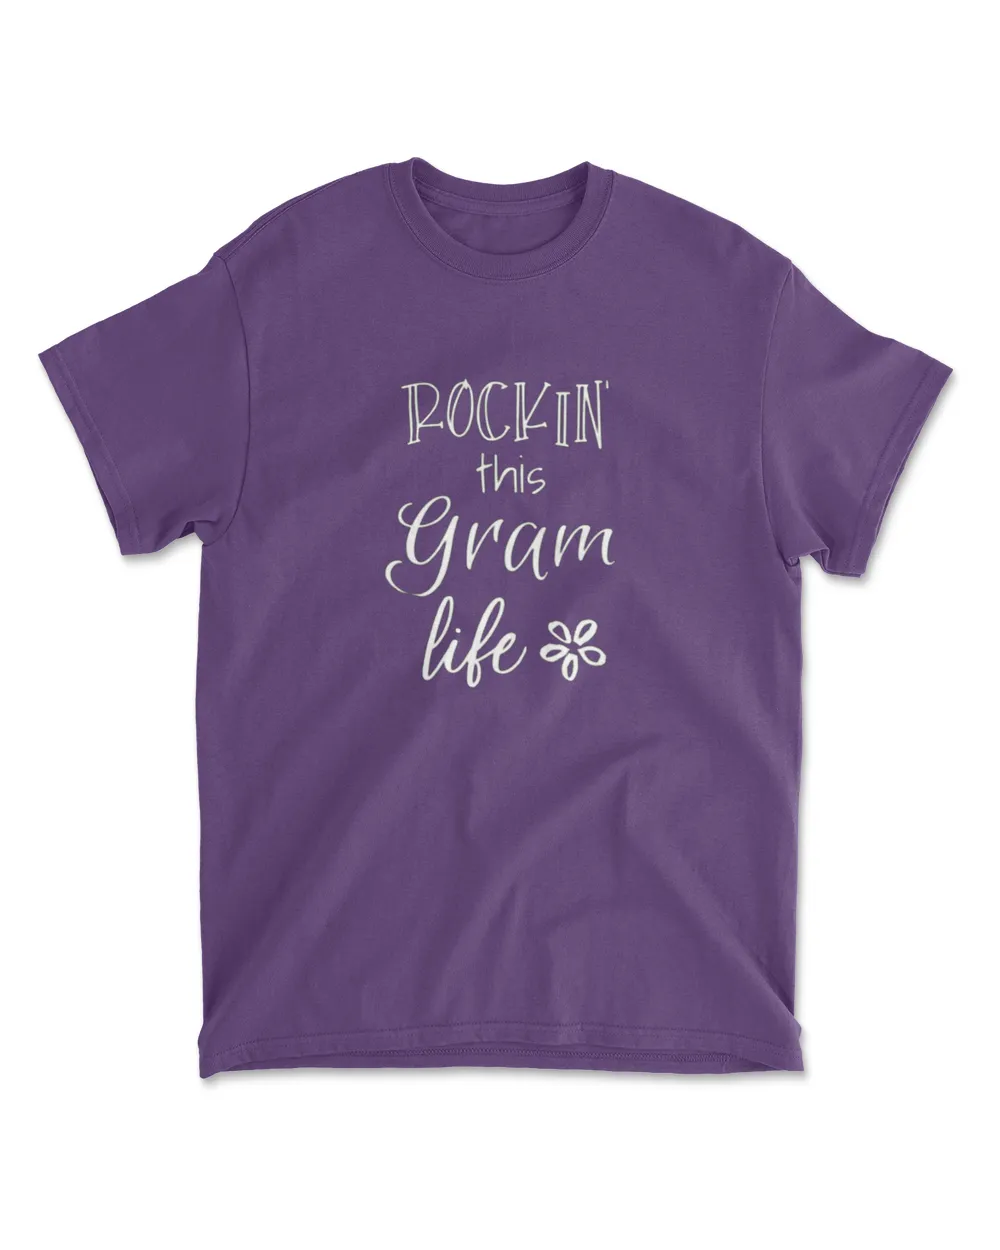 Rockin This Life Gram Tshirt Gift for Grandmother - Funny Gram Shirt Grandmother Birthday Mother's Day Gifts for Gram